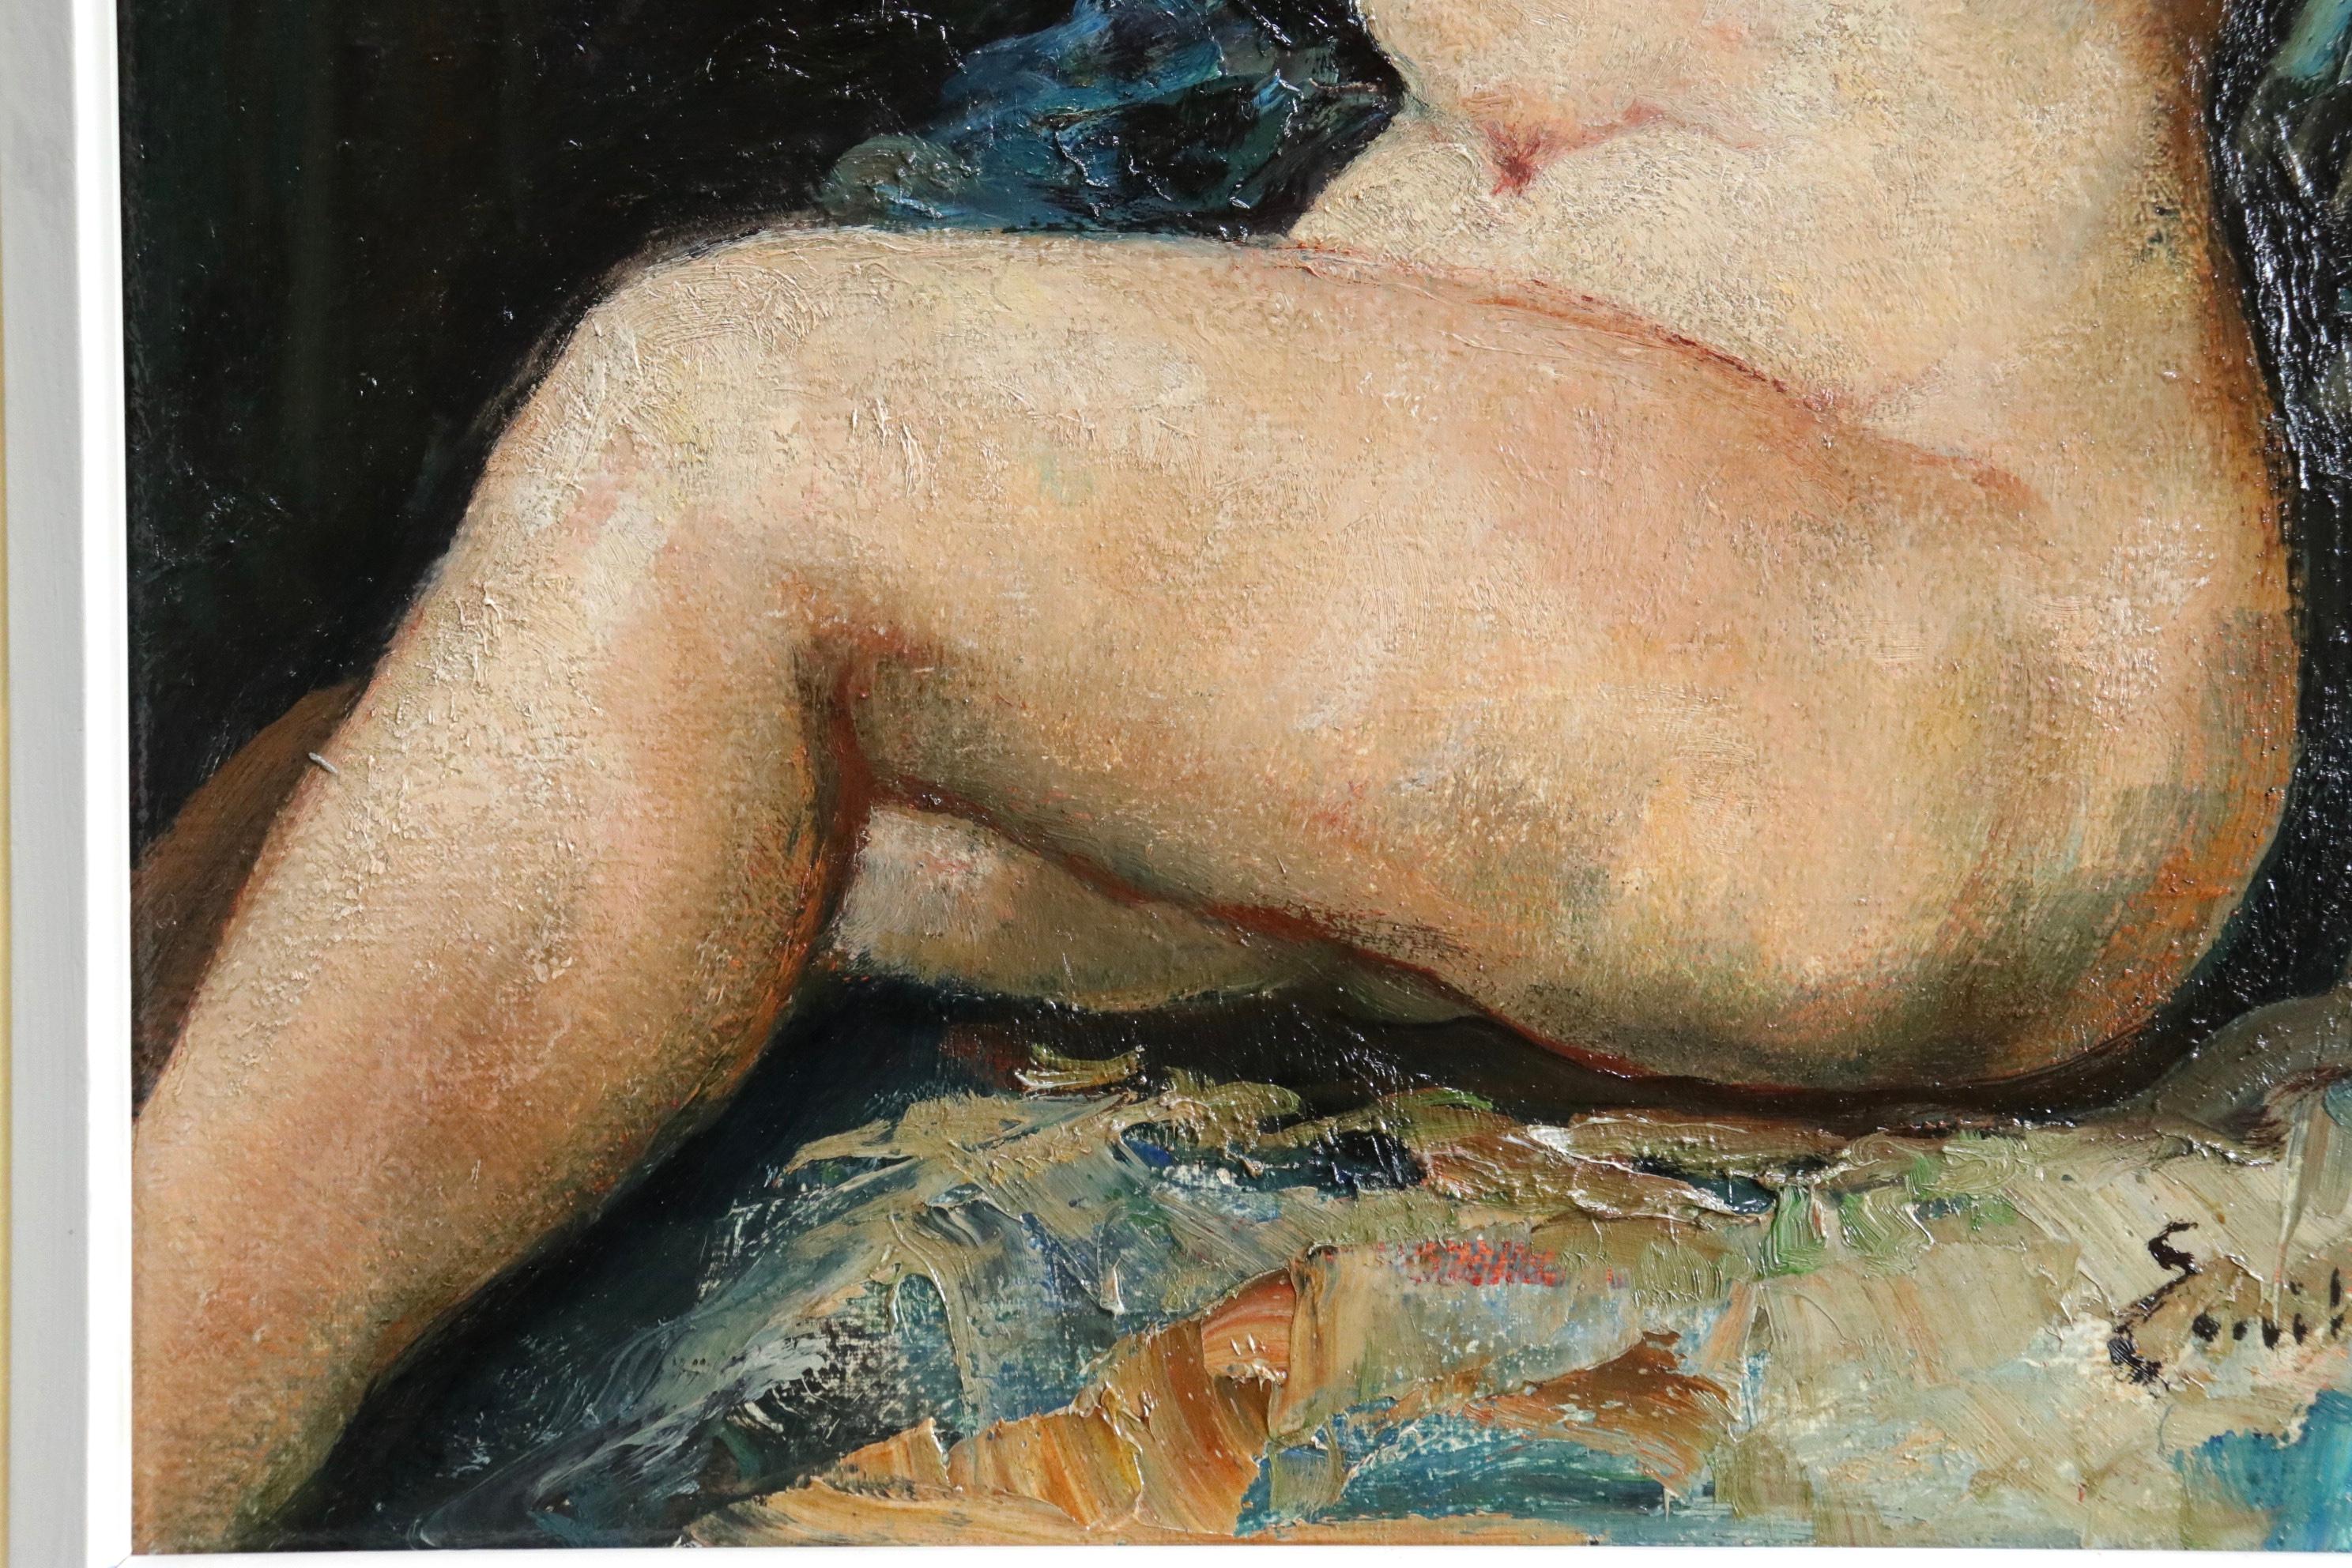 Oil on canvas by Emile Baes depicting a seated nude with a shawl draped over her shoulders and her face hidden as she looks away from the painter. Signed lower right. Framed dimensions are 28 inches high by 24 inches wide. 

Baes was a student of J.